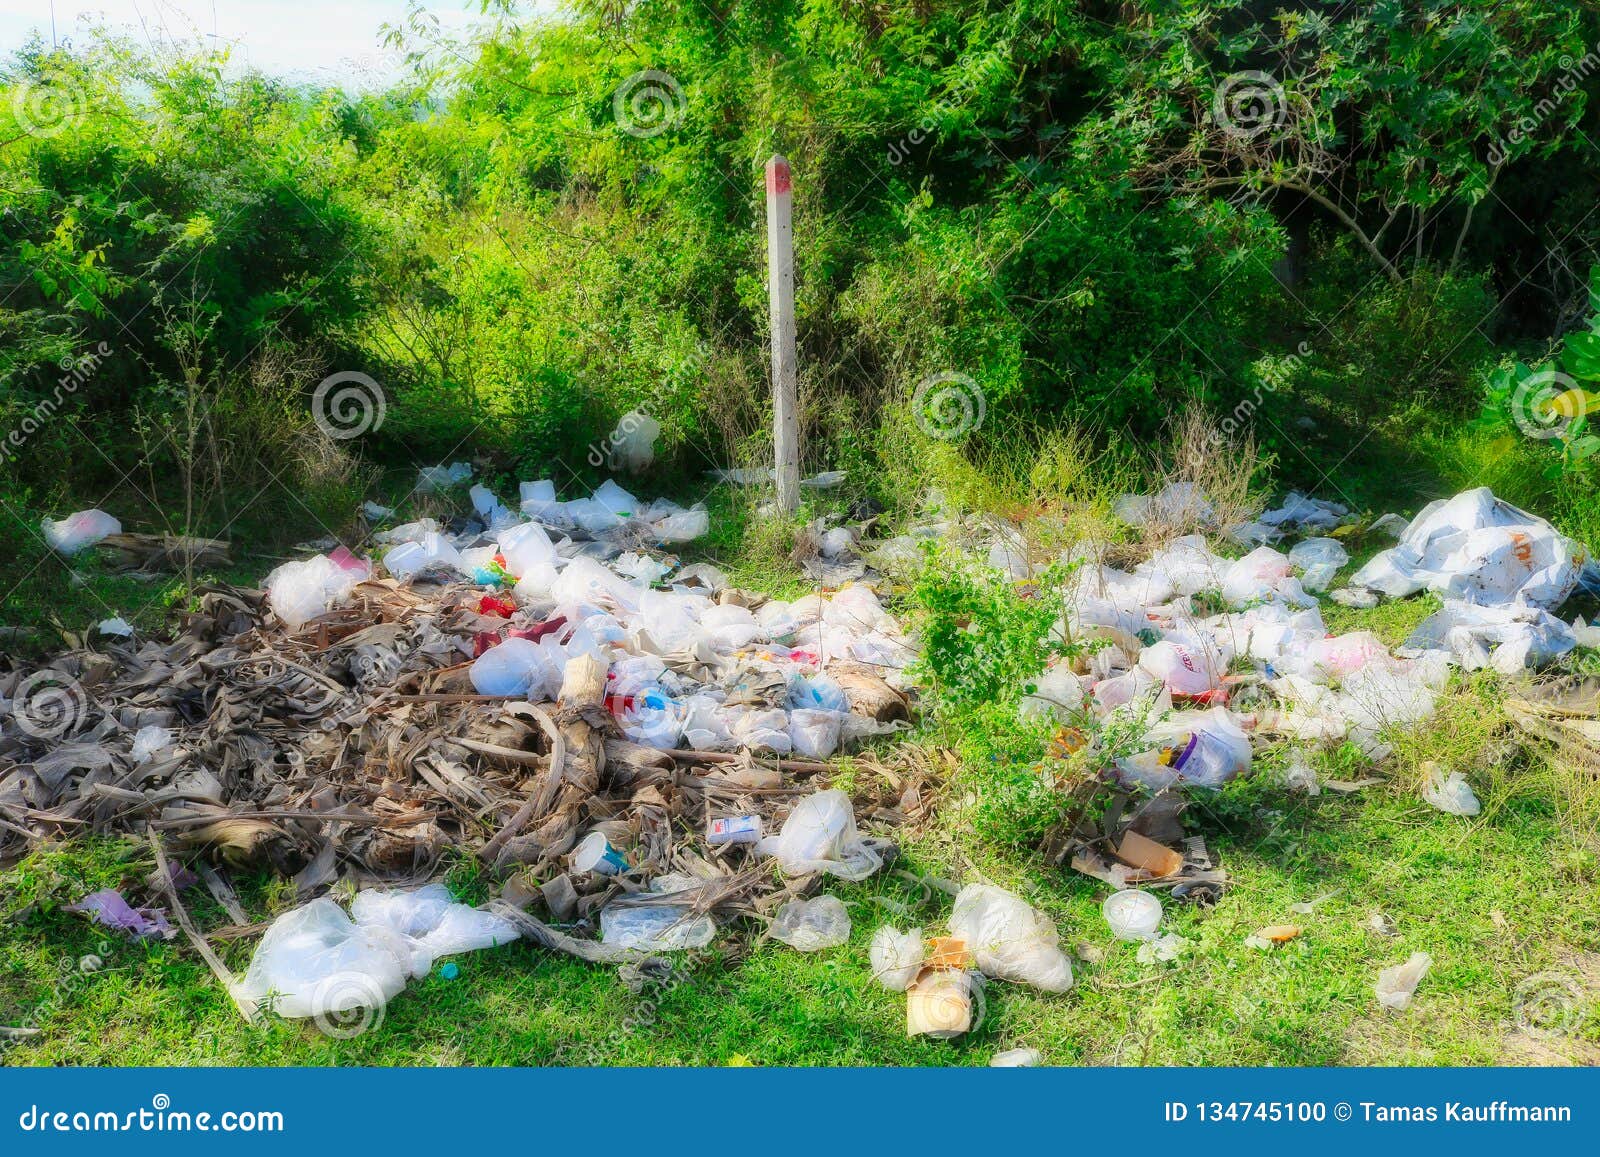 Plastic Waste in Nature of Thailand Stock Photo - Image of environmental, pollution: